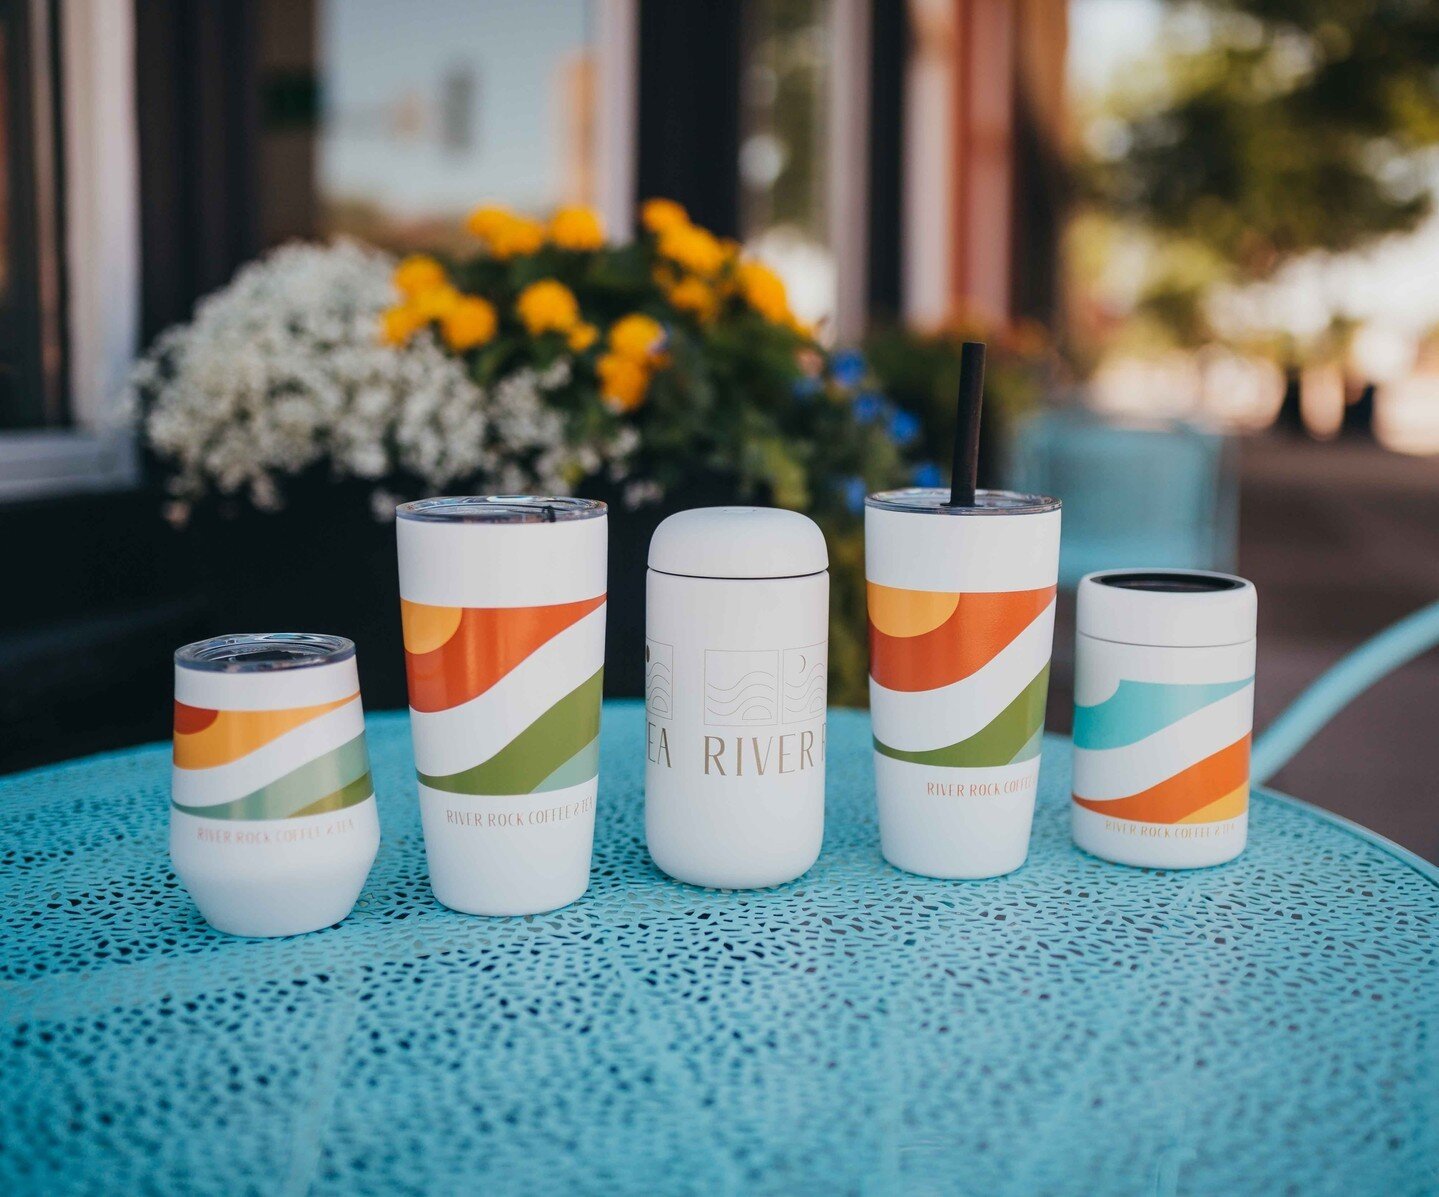 NEW MERCH ALERT! 🤩 No matter what your drink of choice is, our Summer drinkware collection allows you to sip in style. Show Mother Earth some love by minimizing the use of to-go cups! And as always, bring in your reusable vessel and receive $0.25 of